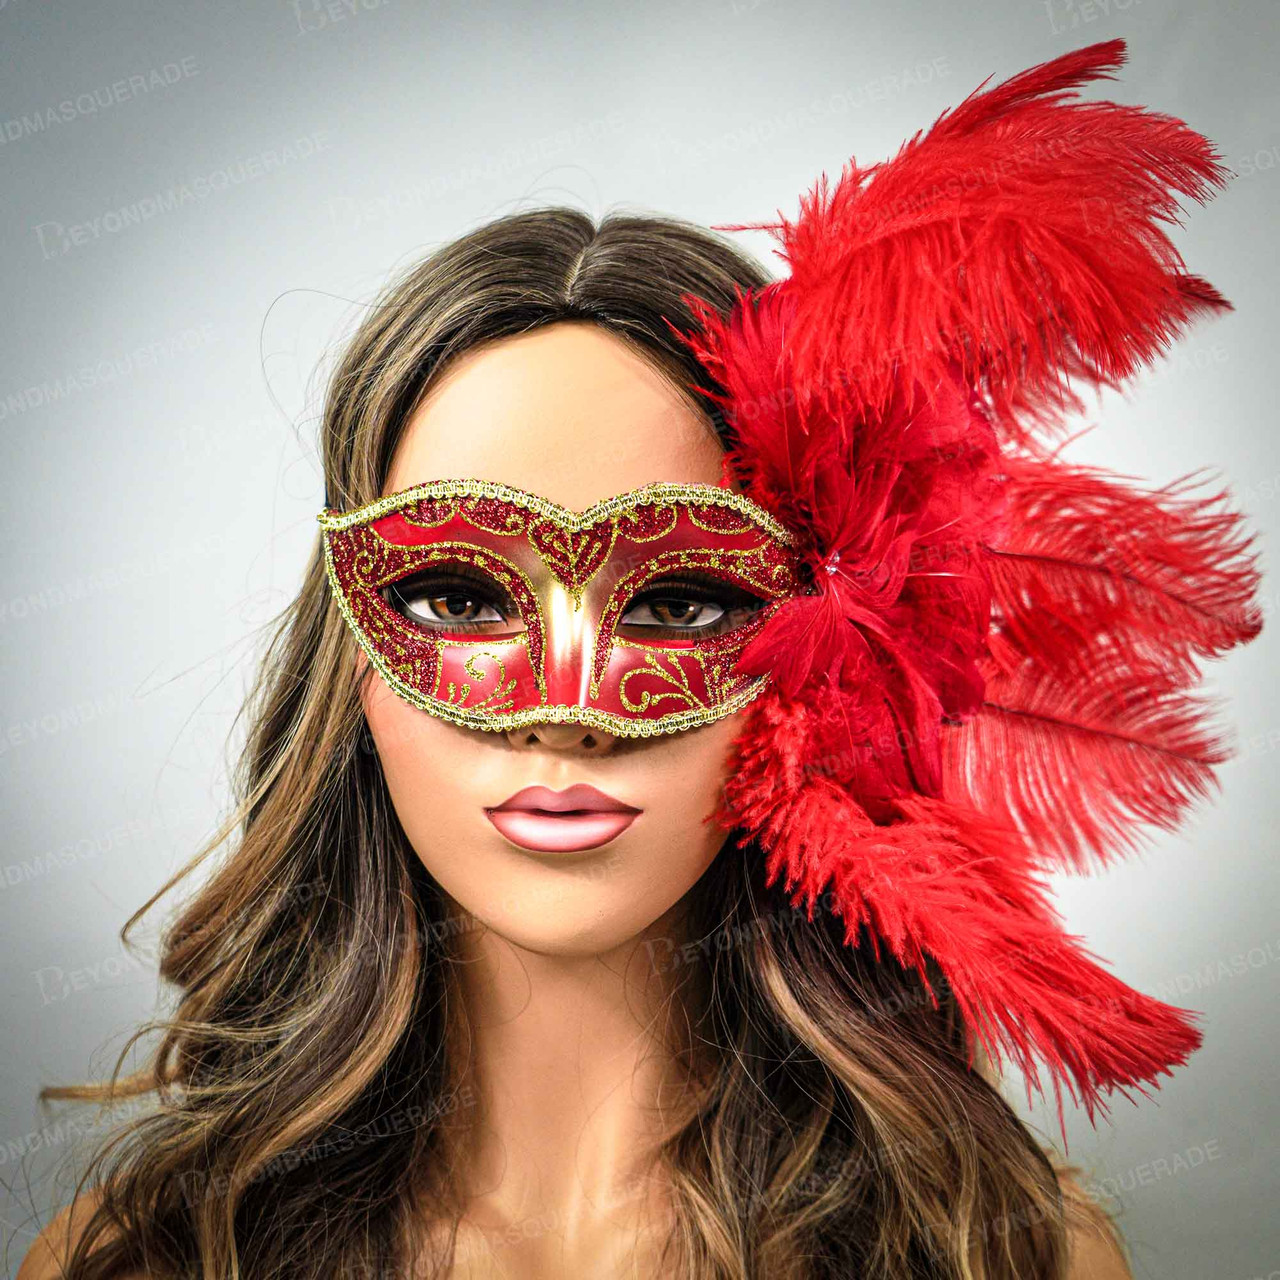 Feather Masquerade Masks Halloween Face Mask Feathers Masquerade Mardi Gras Party Mask Red